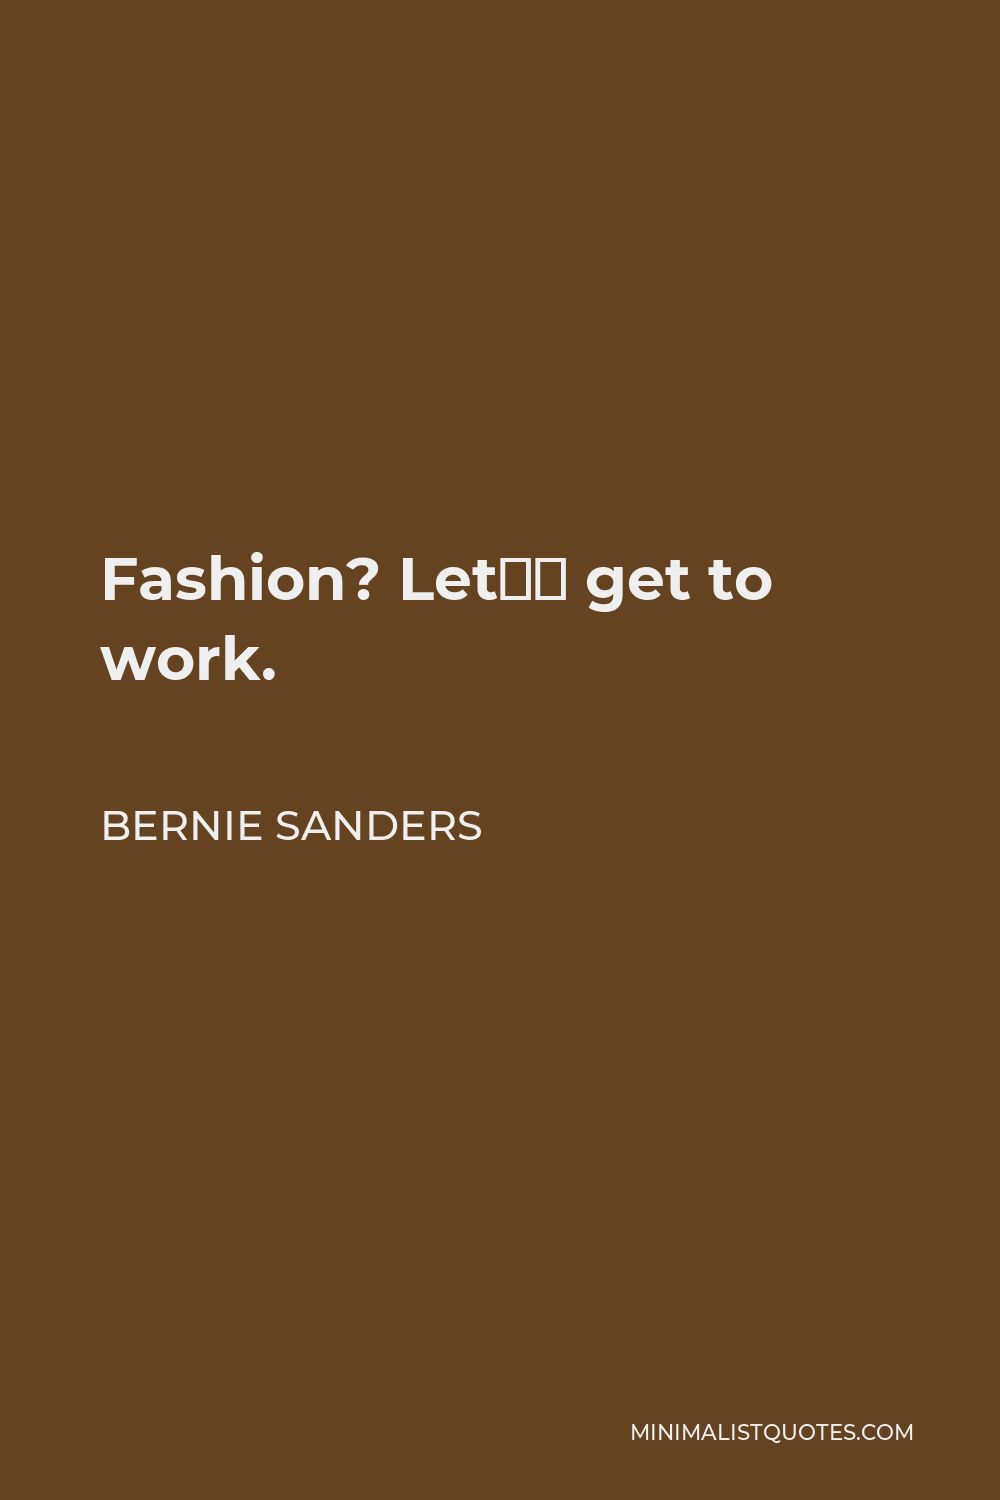 Bernie Sanders Quote - Fashion? Let’s get to work.